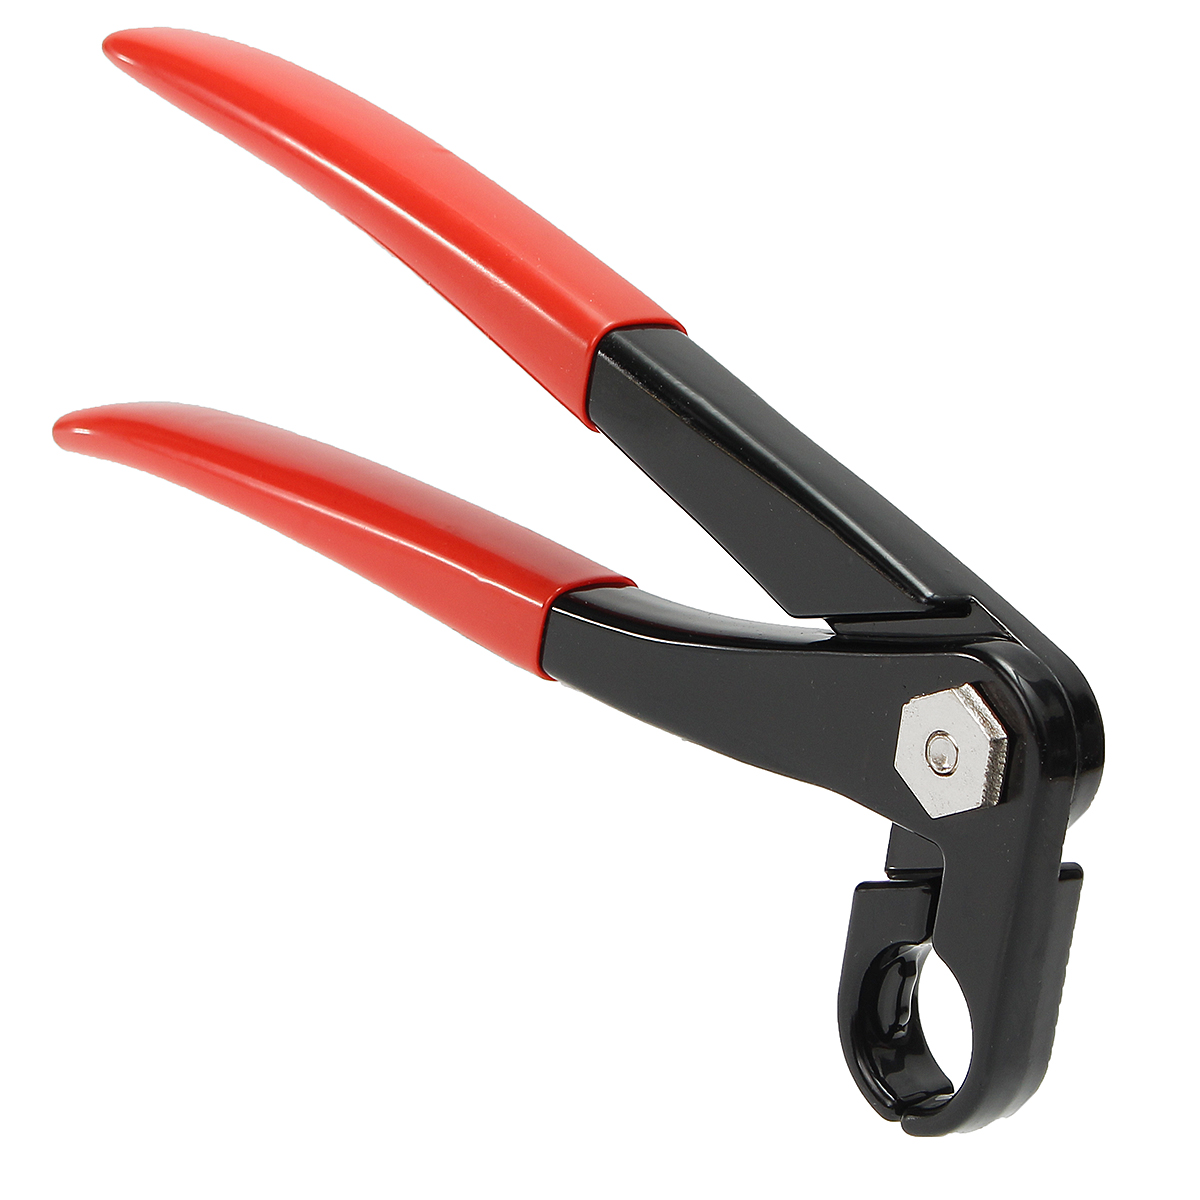 Fuel-Feed-Pipe-Pliers-Universal-Grip-In-Line-Tubing-Filter-Car-Repair-Tool-Profiled-Head-Hand-Tool-A-1552573